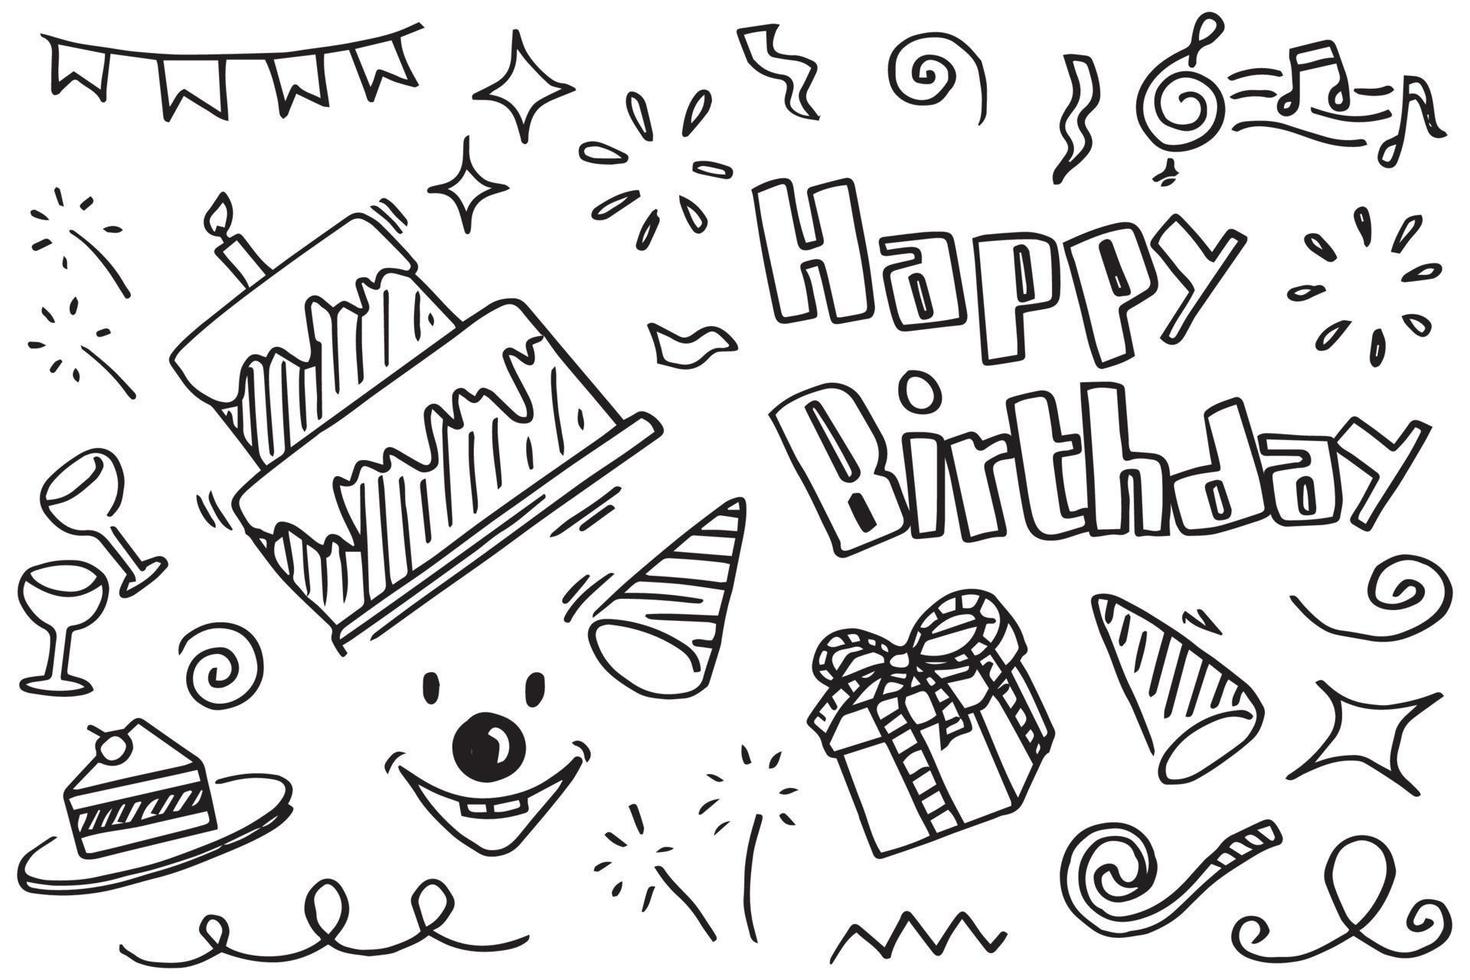 Vector illustration of happy birthday party doodle black and white seamless pattern